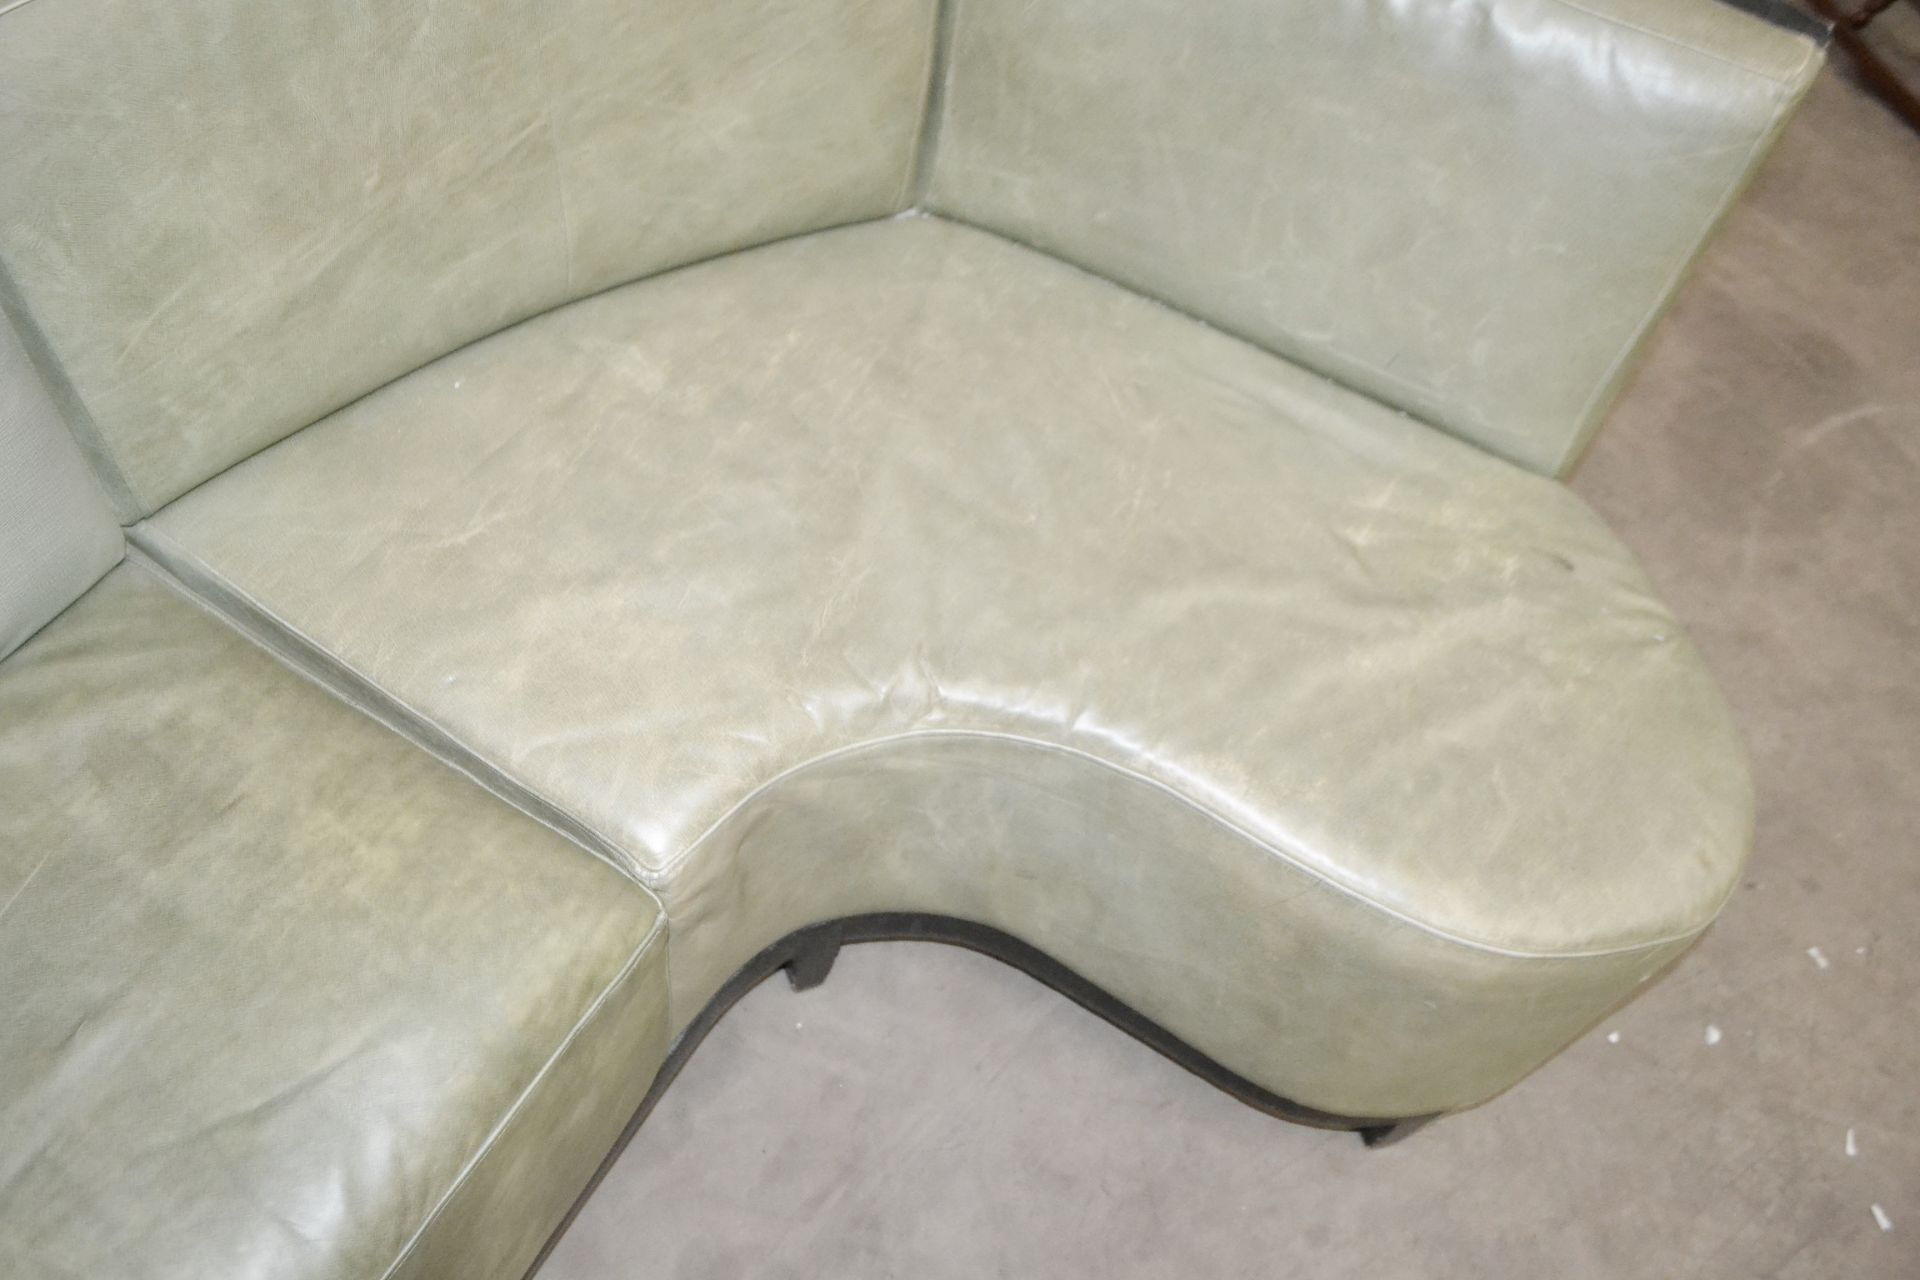 2 x Sections Of Curved Commercial Seating Upholstered In A Pale Green Faux Leather - Image 5 of 5